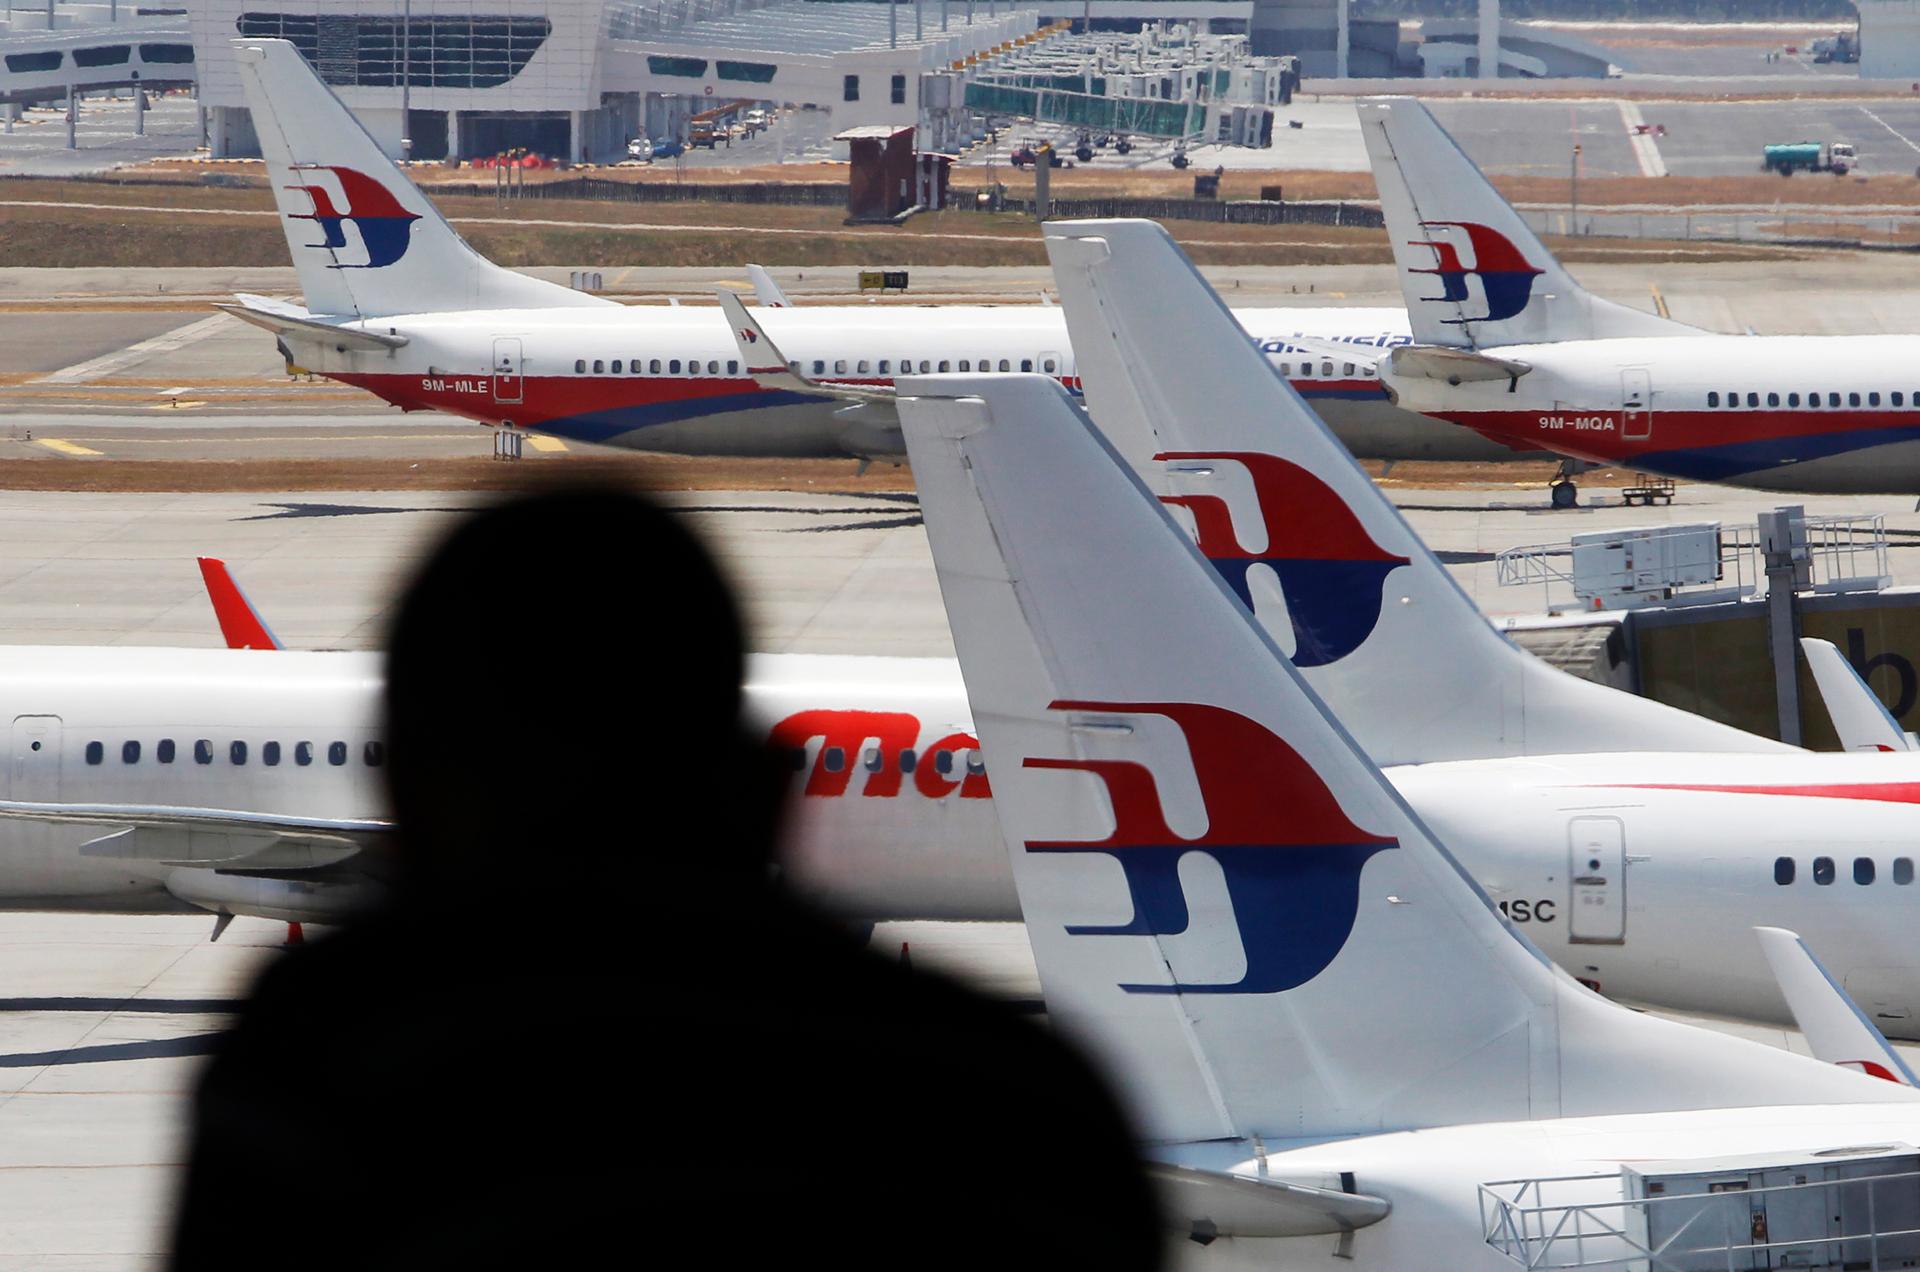 Malaysia Airlines planes sit on the tarmac at the Kuala Lumpur International Airport on March 11, 2014. 